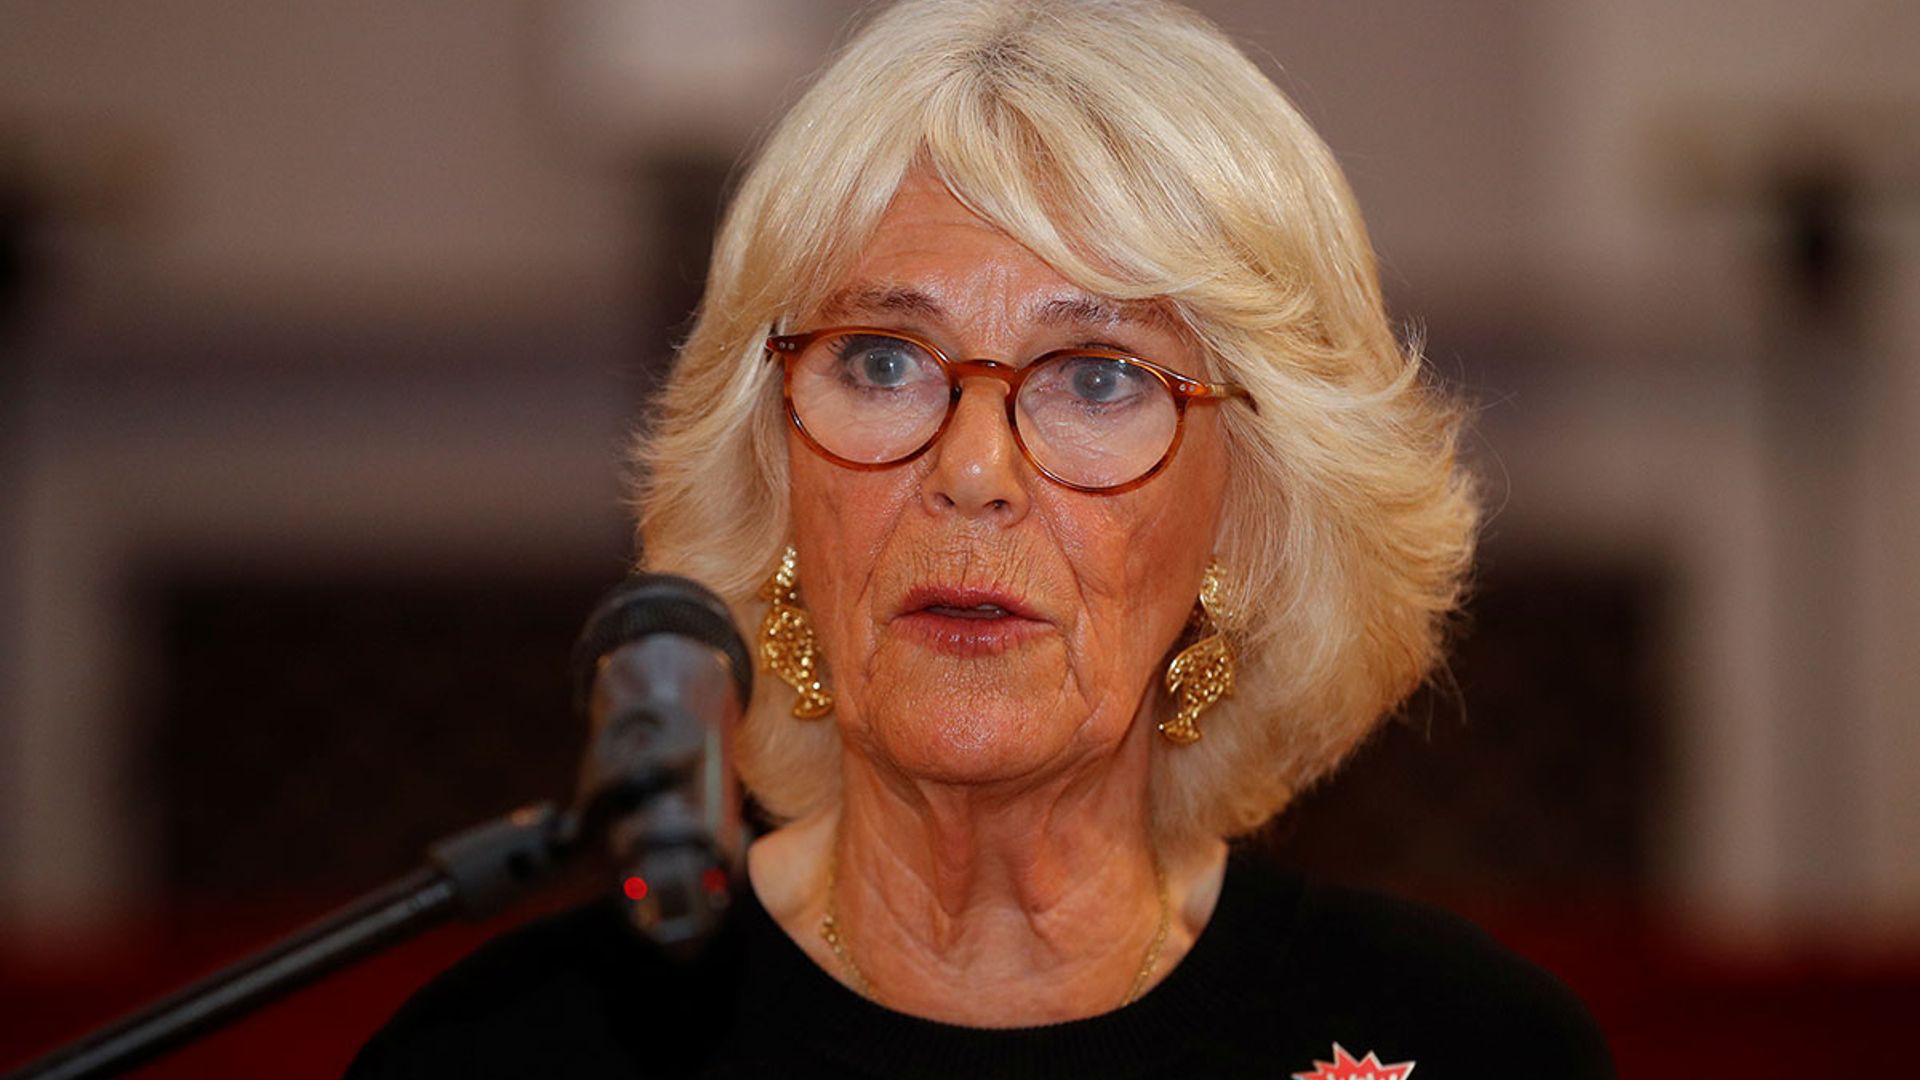 Duchess of Cornwall calls for action to prevent violence against women in powerful speech